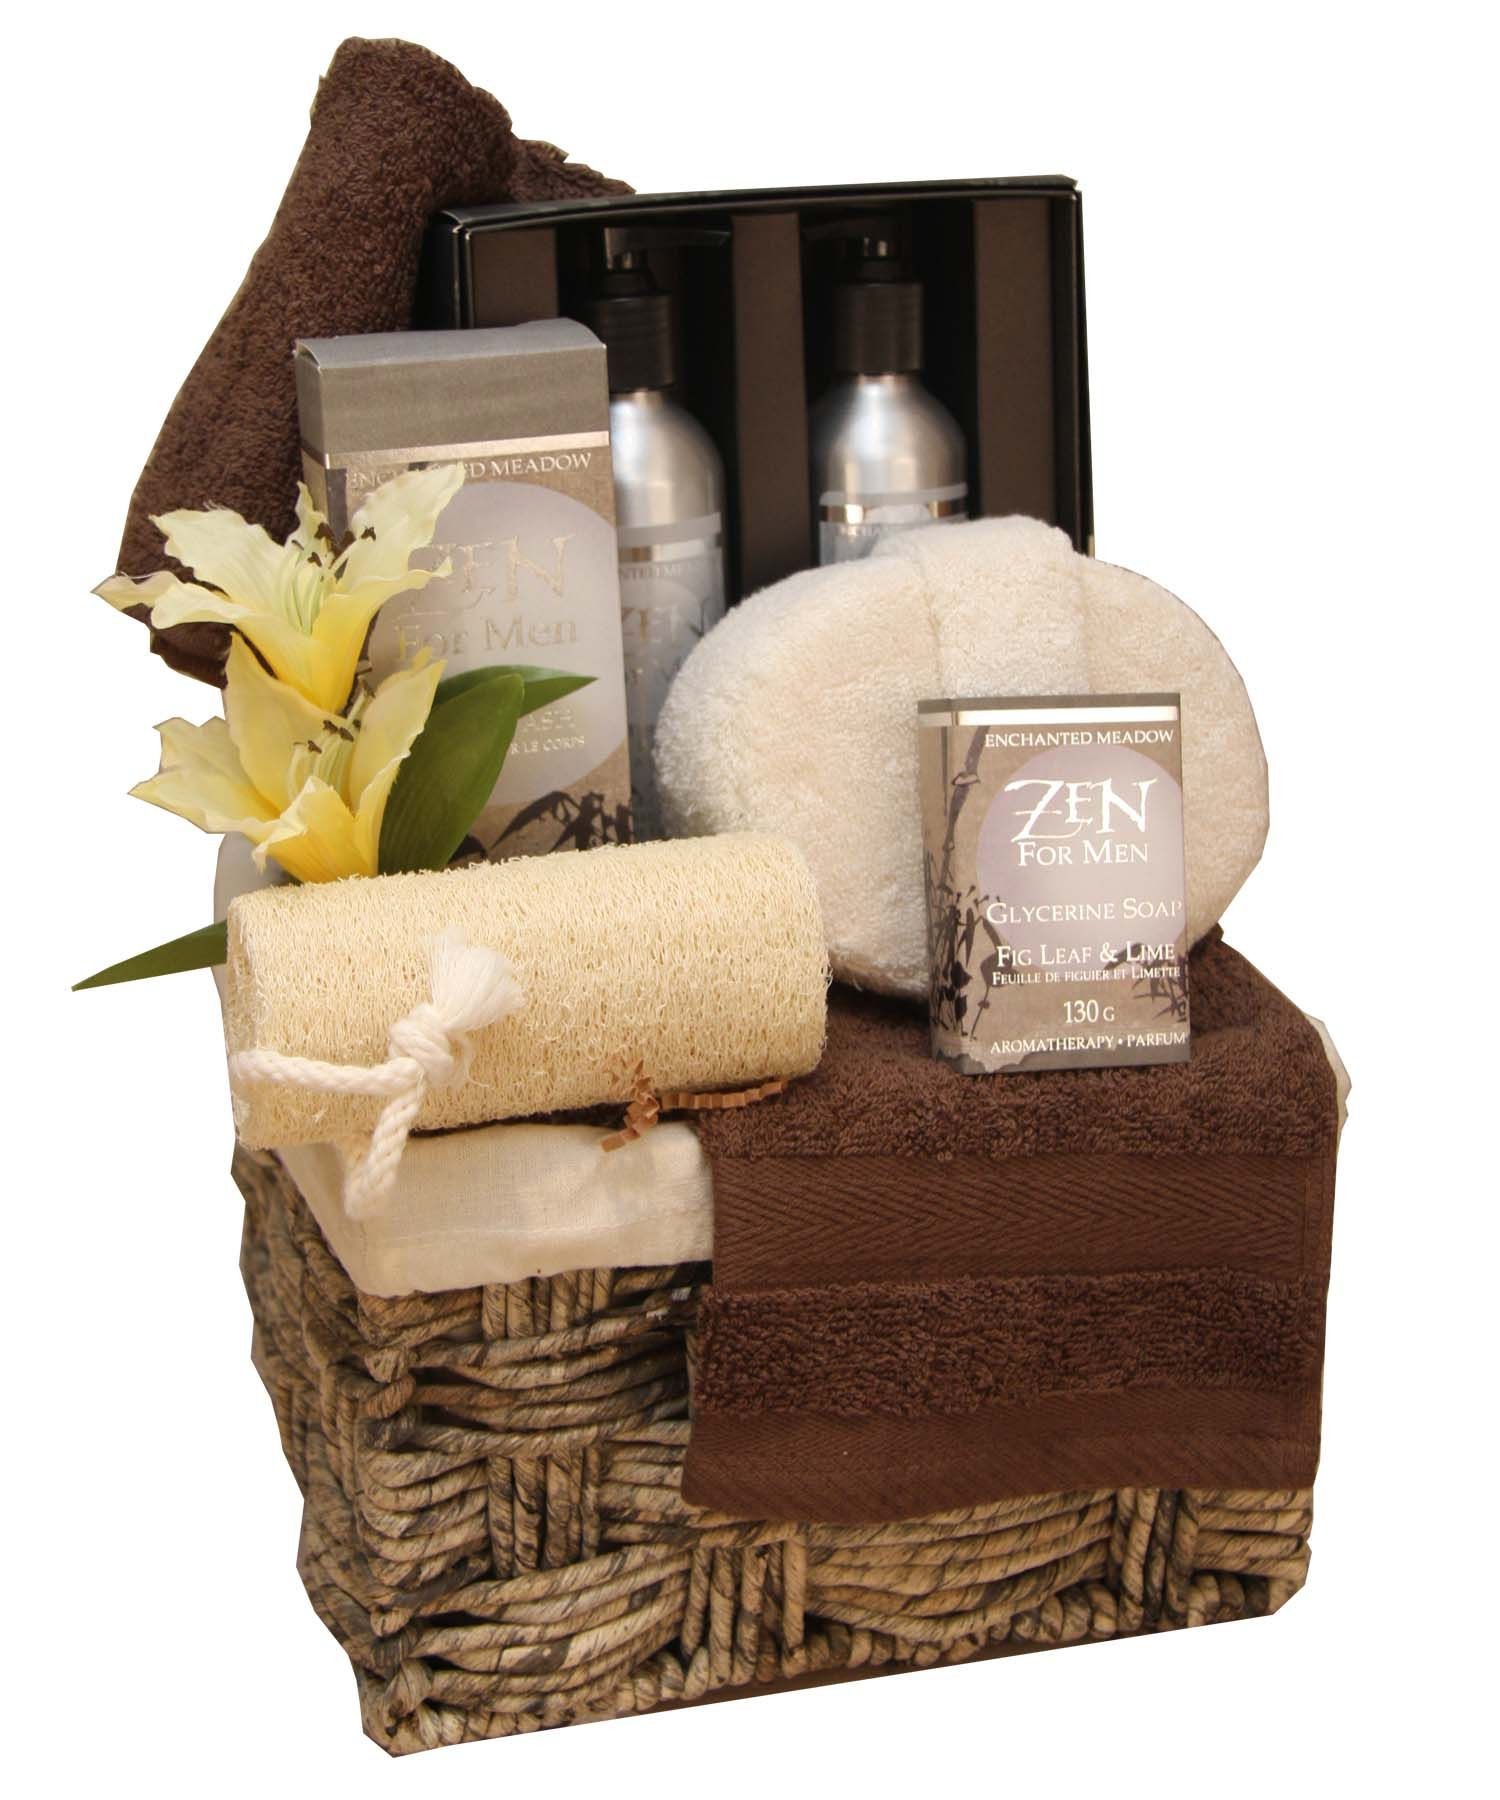 Spa Gift Baskets Ideas
 Manly Spa Gift Basket 26lime manly ts